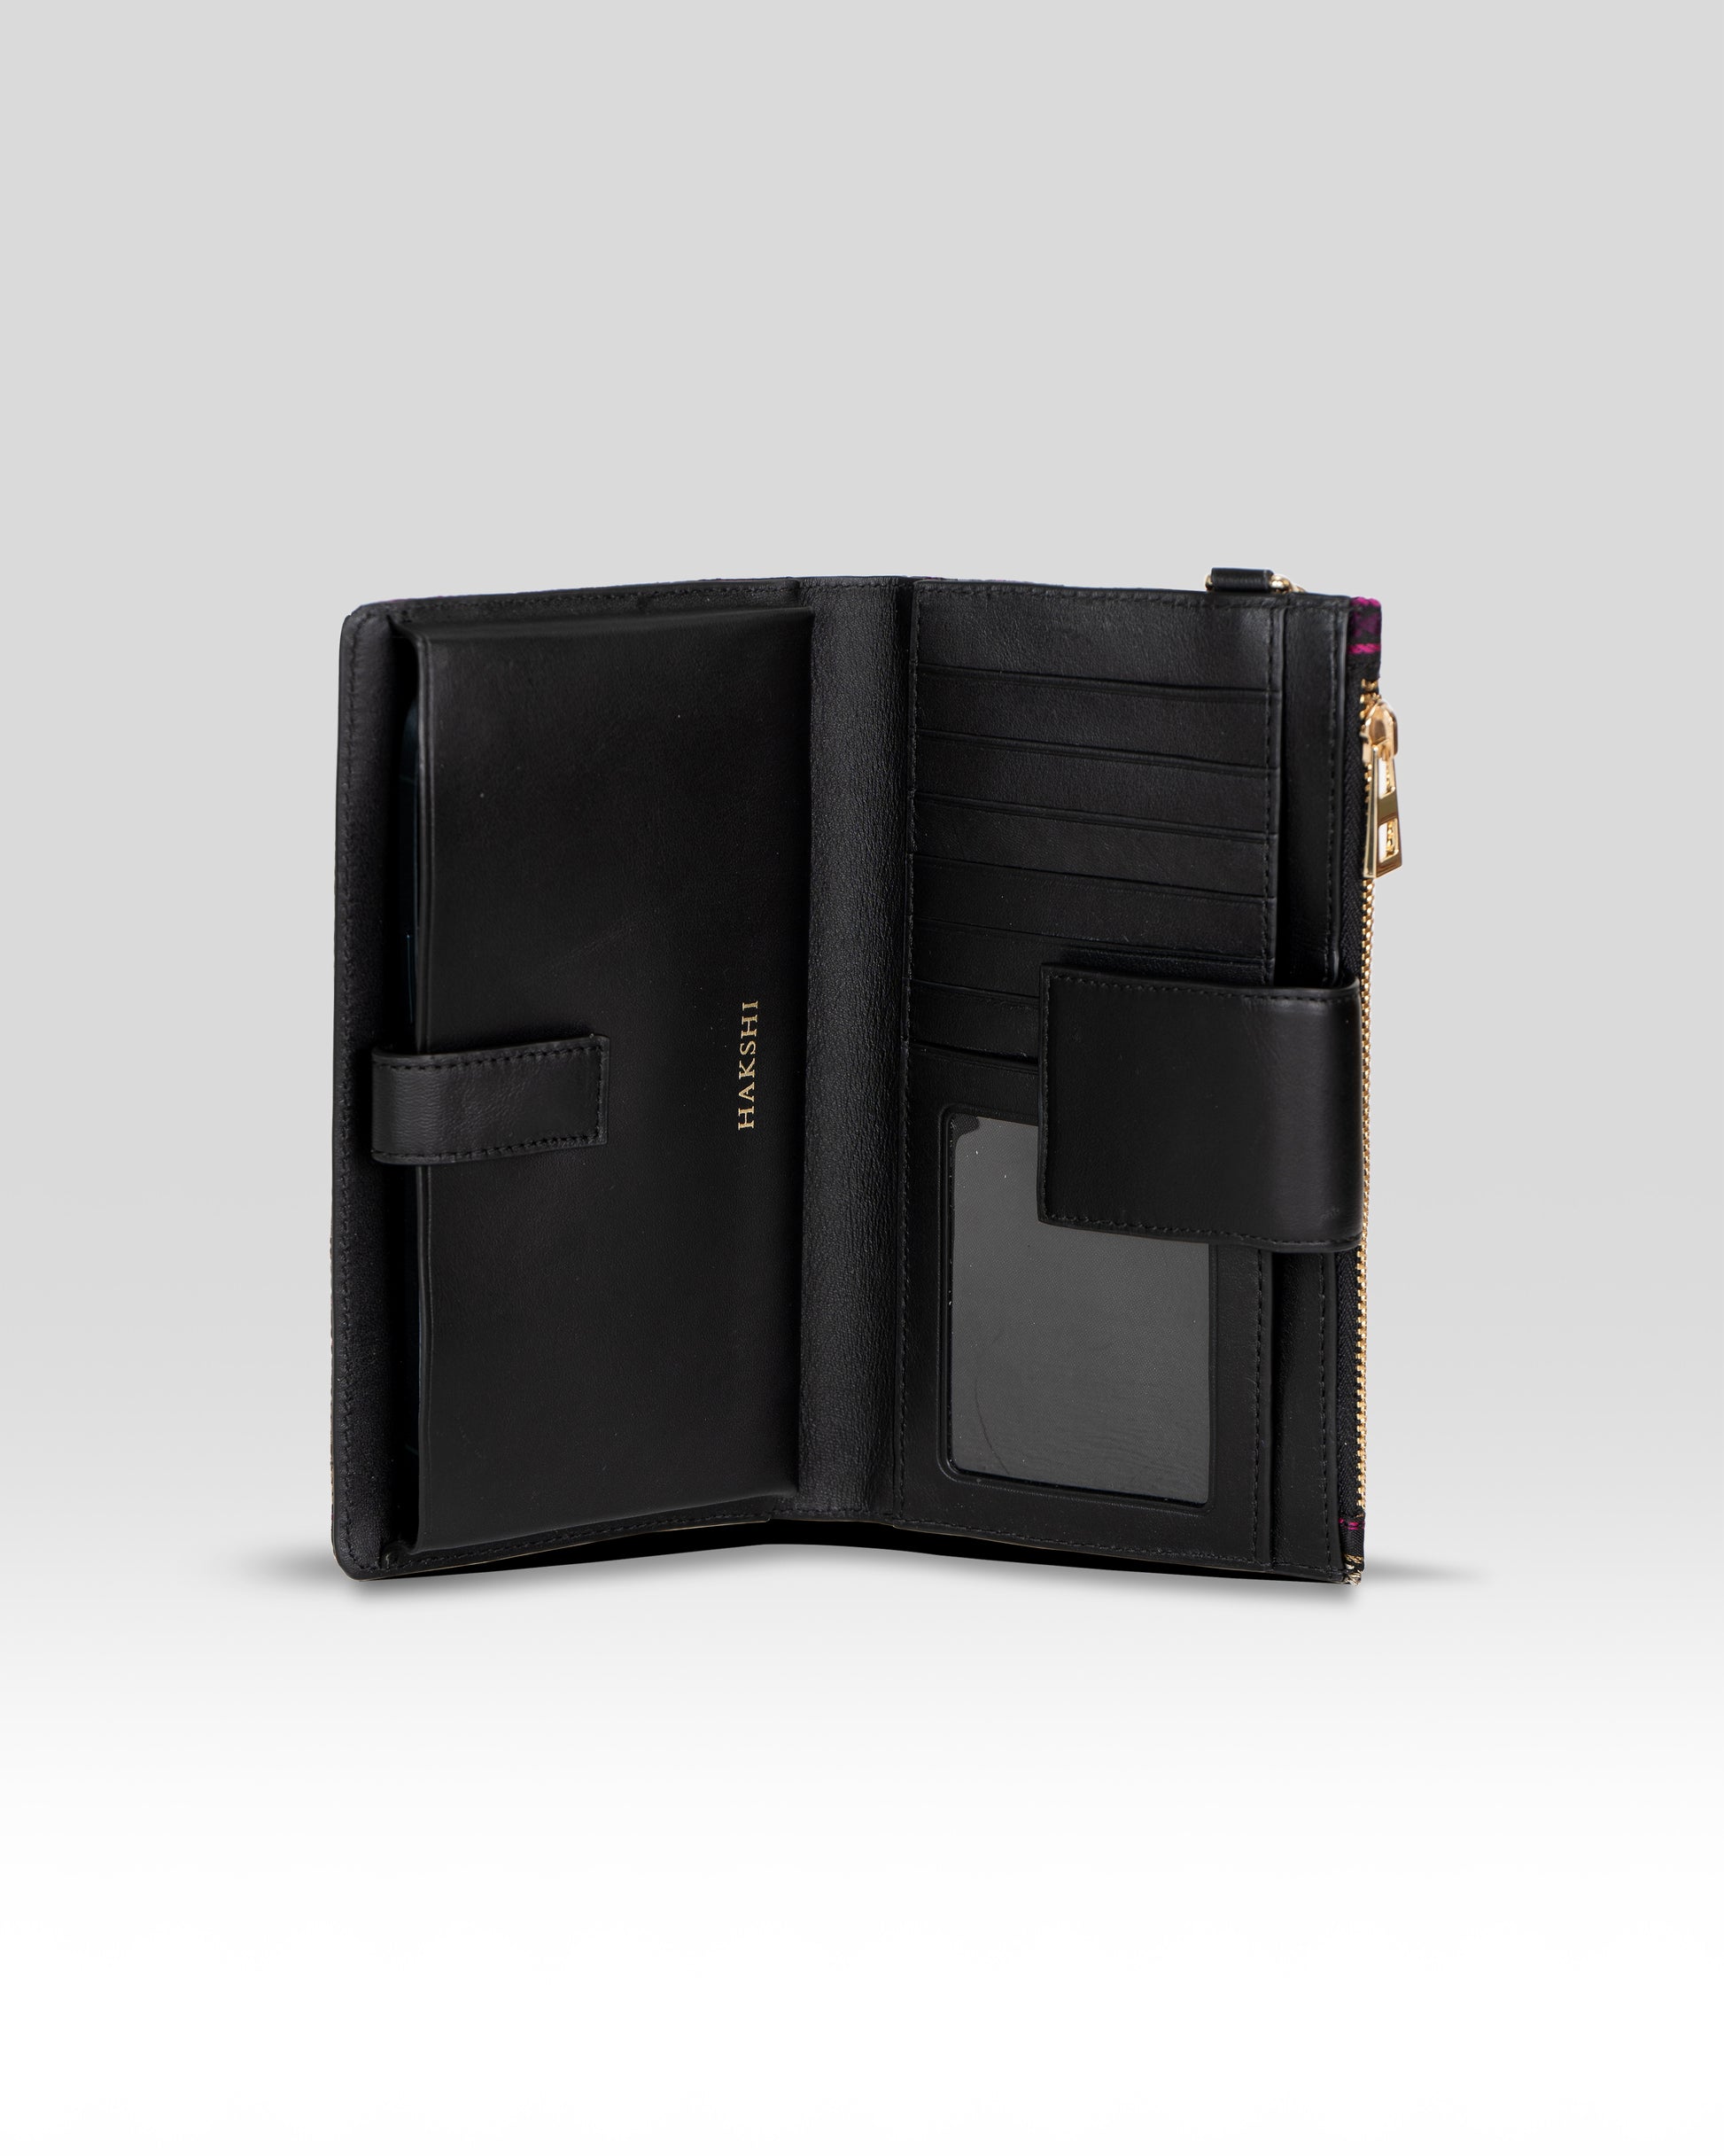 Sleek and versatile accessory crafted from genuine leather, ideal for organizing your essentials with timeless sophistication